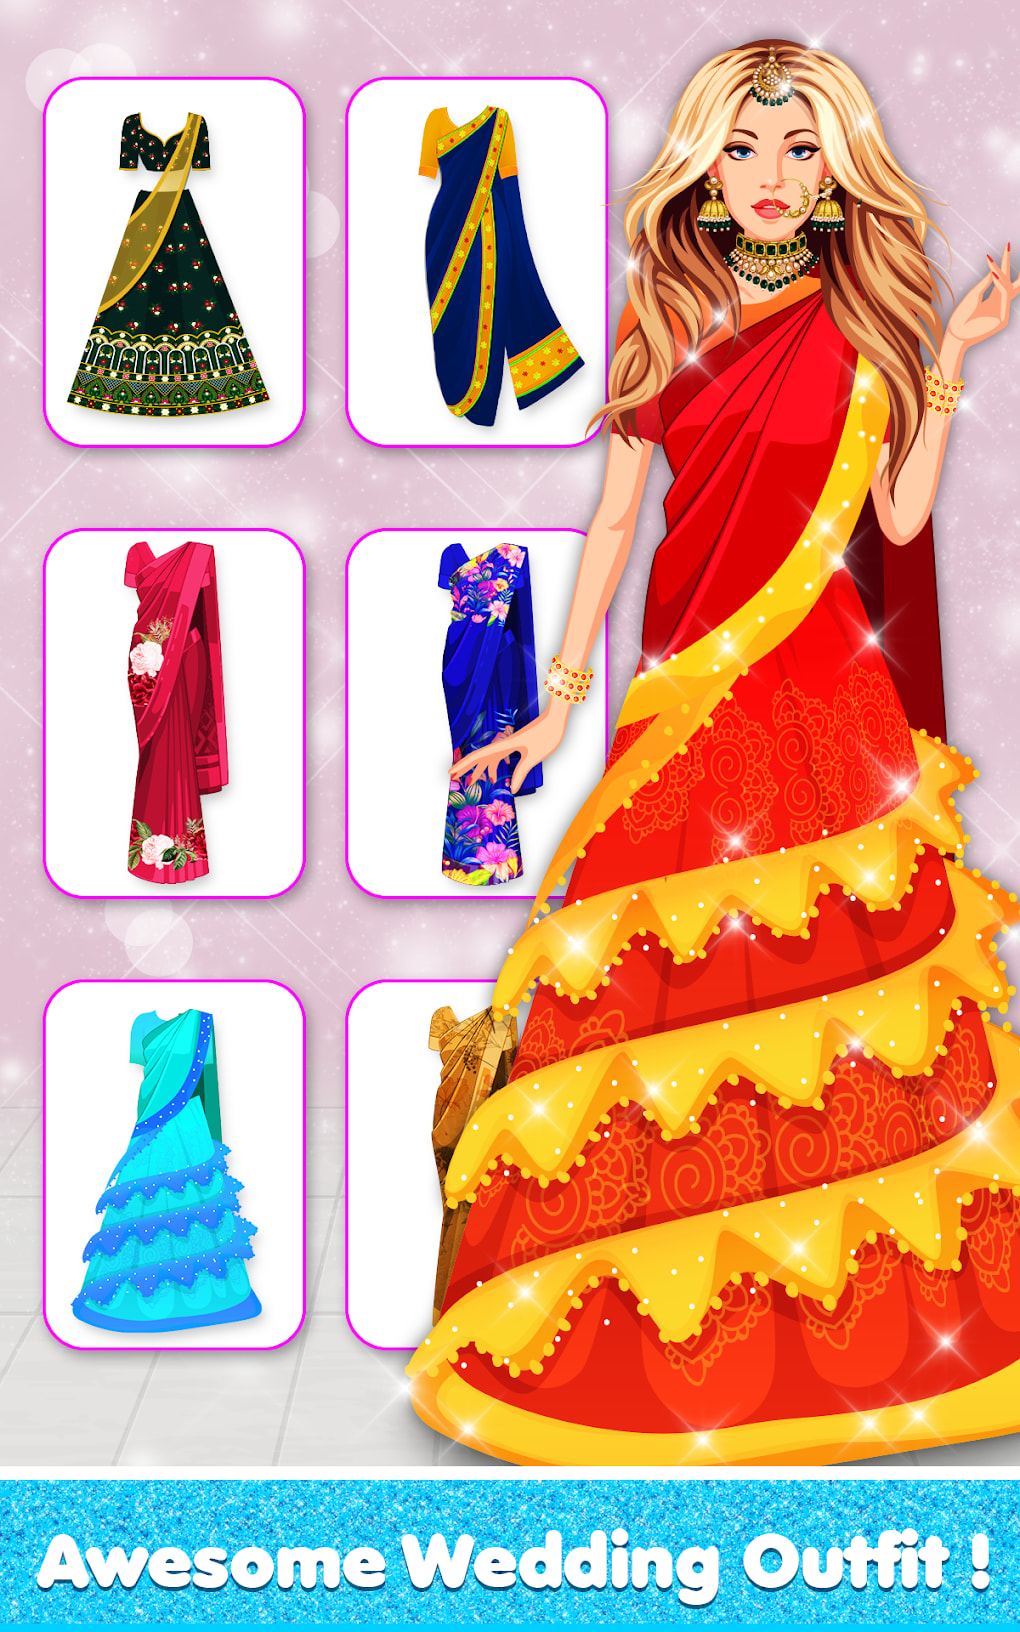 Royal North Indian Wedding Girl Dressup and Makeup-wedding games:Amazon.in:Appstore  for Android